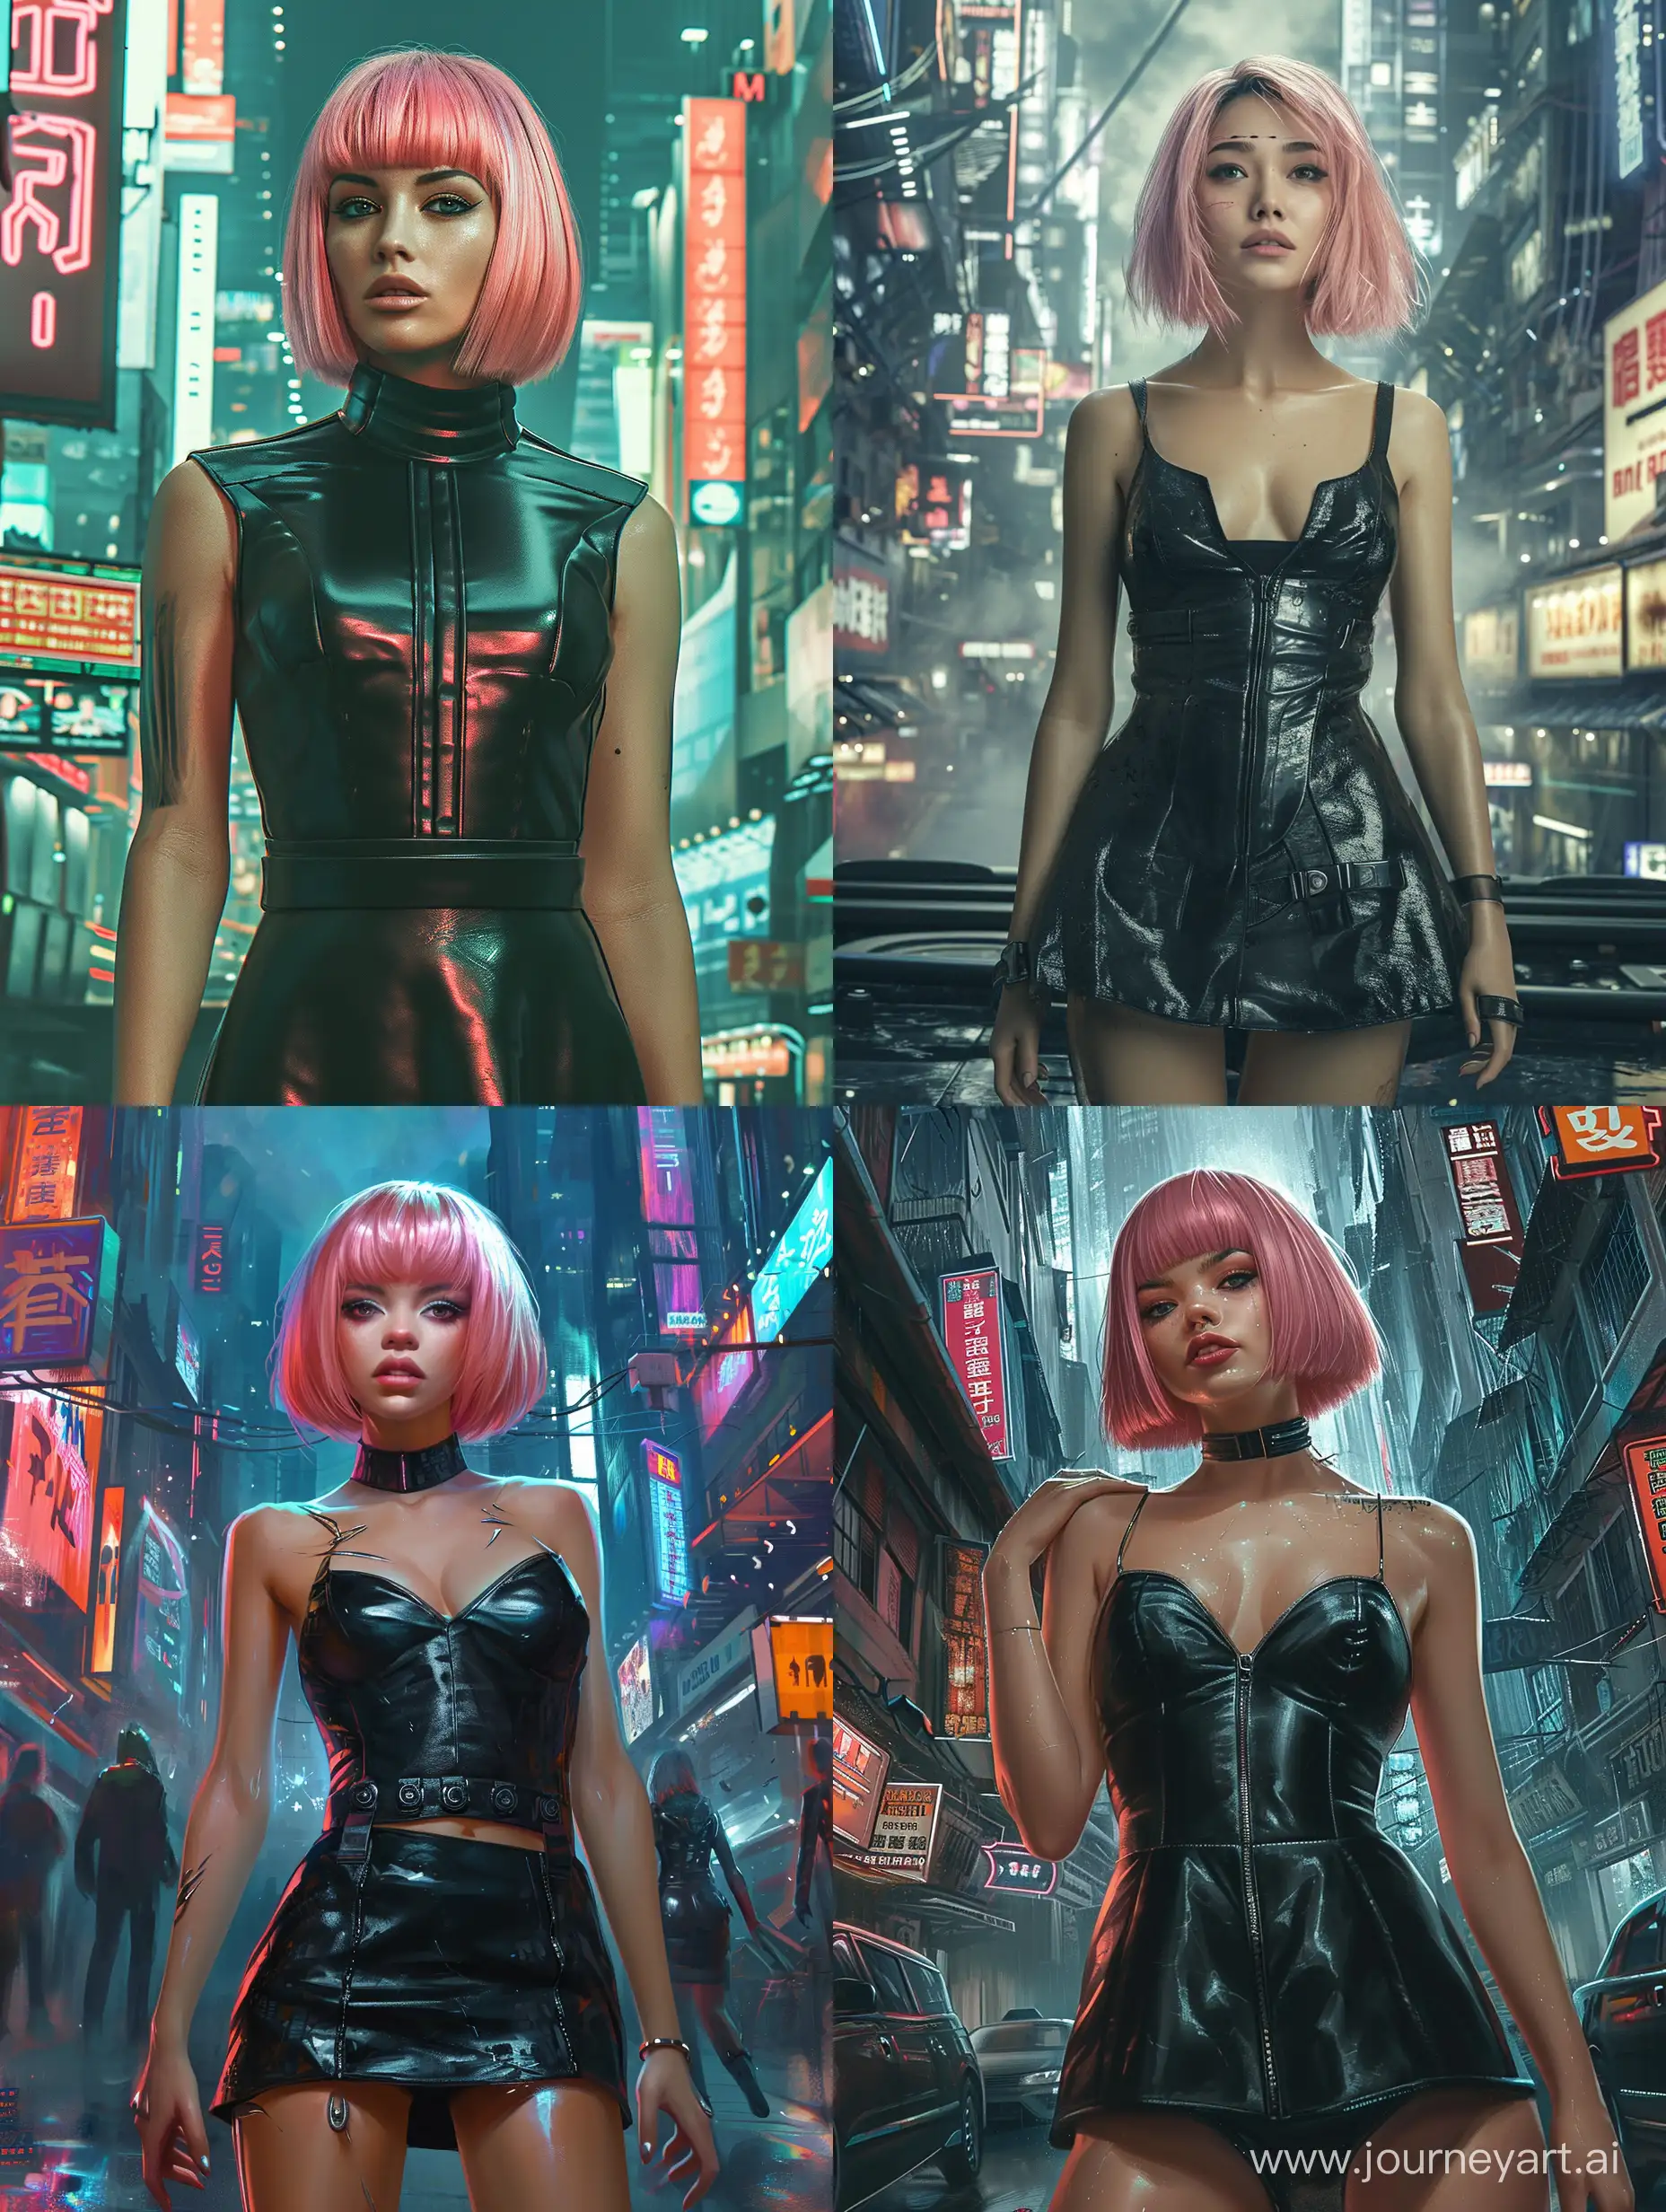 beautiful woman, pink hair, bob cut, wearing a black leather dress, in a cyberpunk city, synthwave, strong facial expression, Film noir aesthetic, artistic darkness, manga art, character art